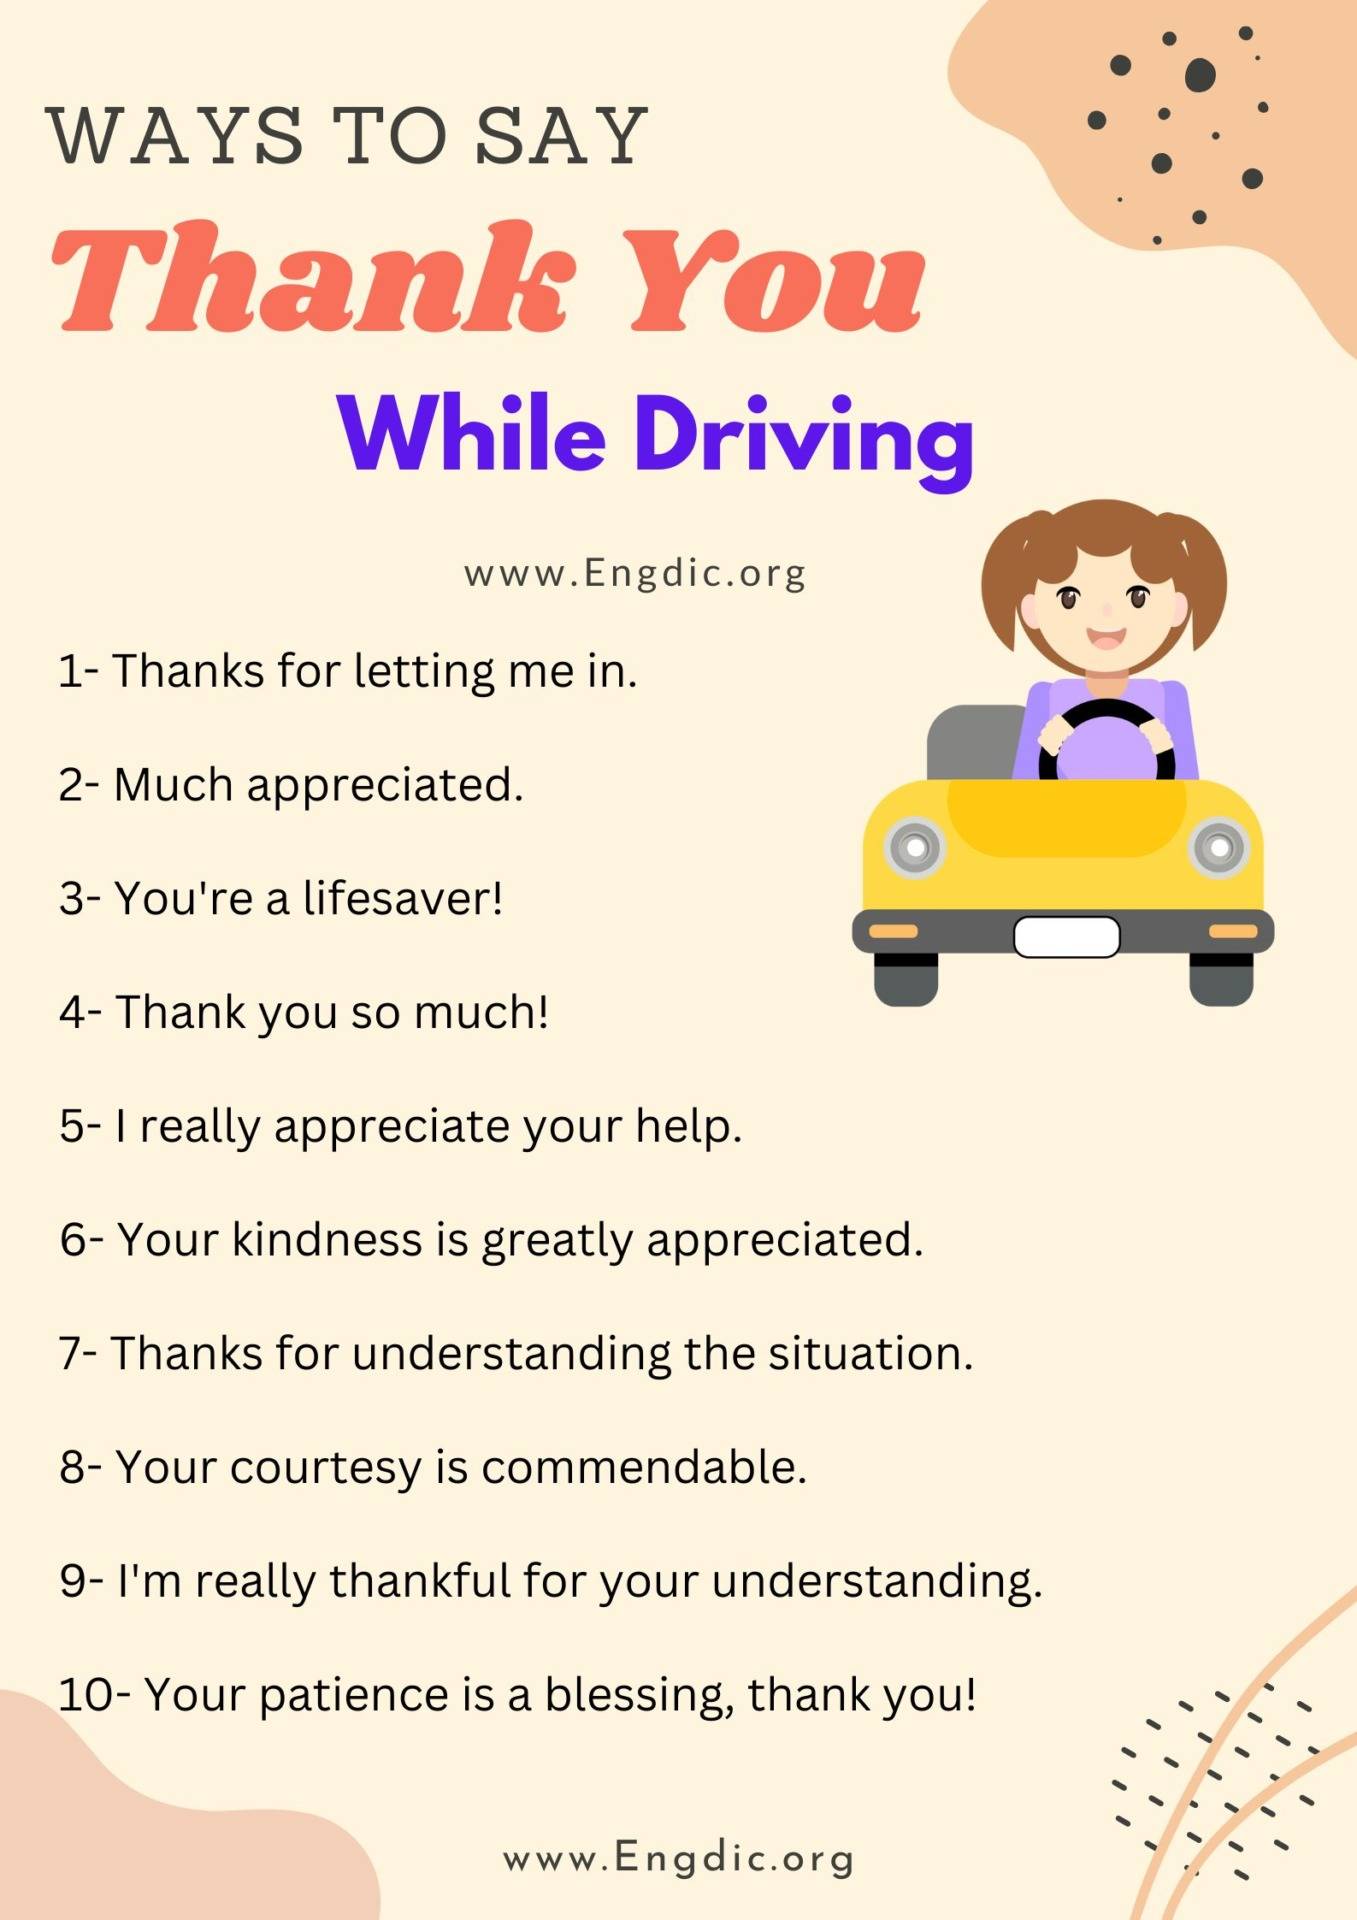 Ways to say thank you While Driving